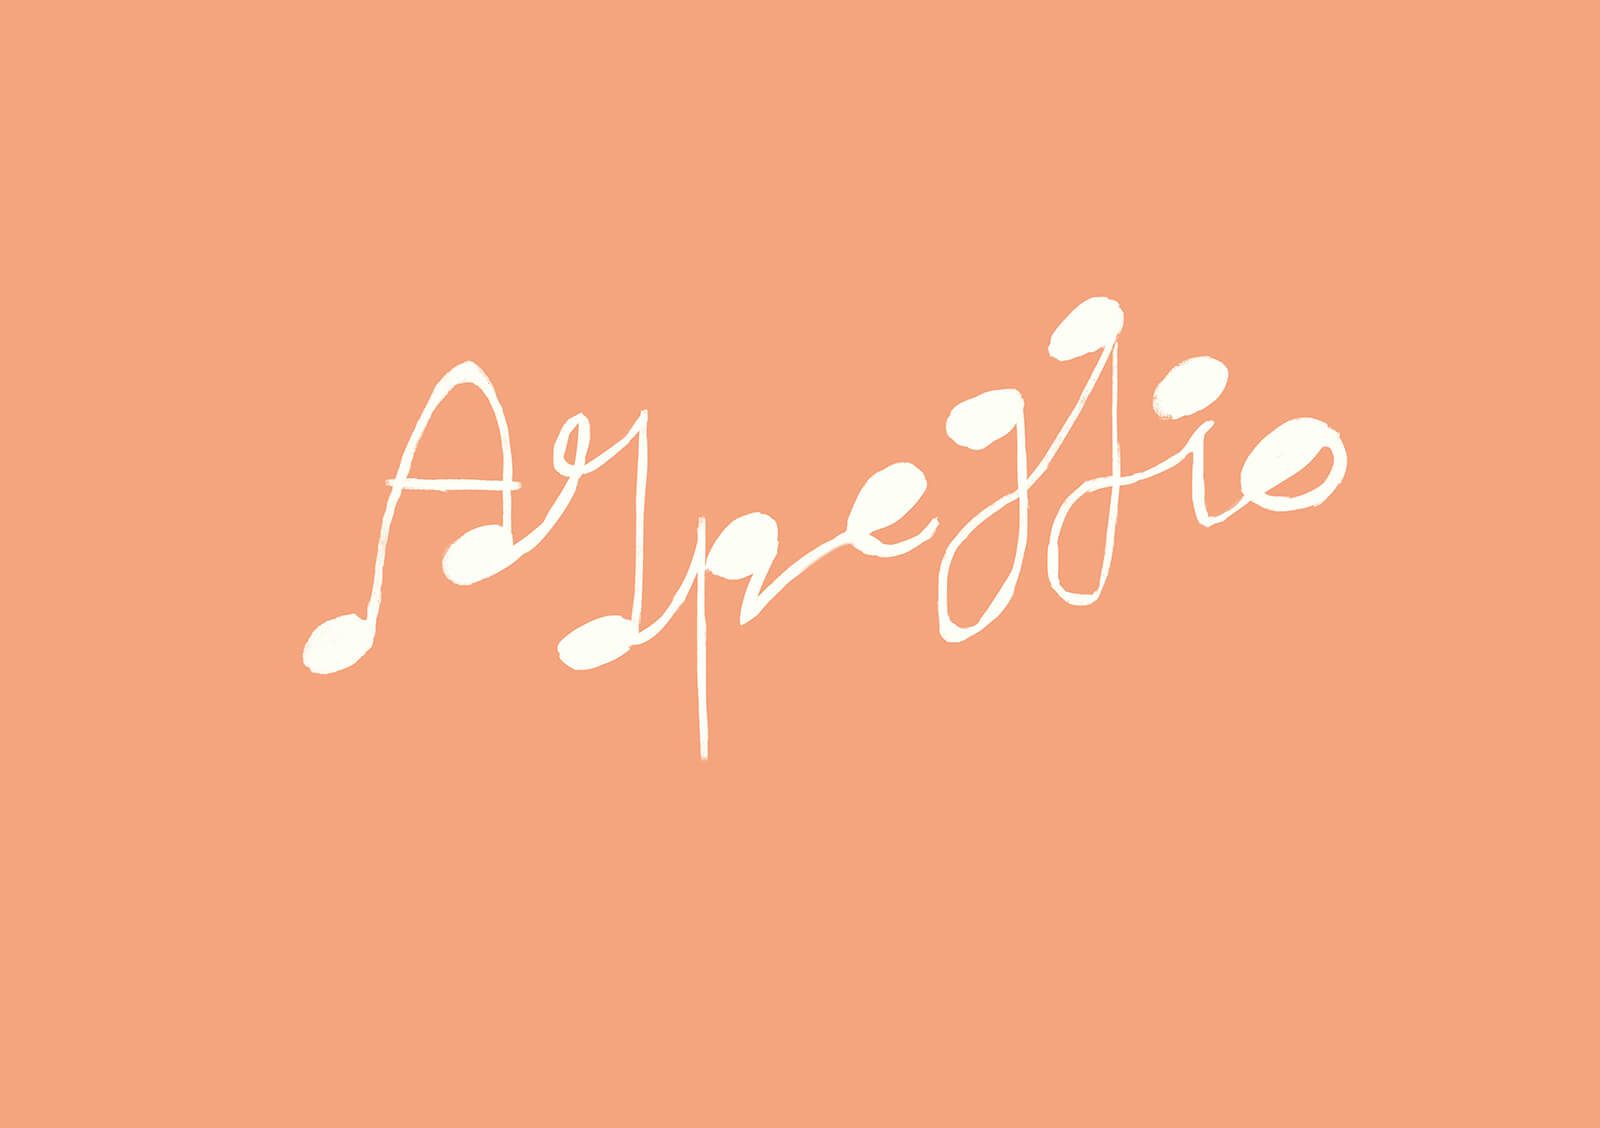 Title card for the film Arpeggio in white font on an orange background stylized to resemble music notes